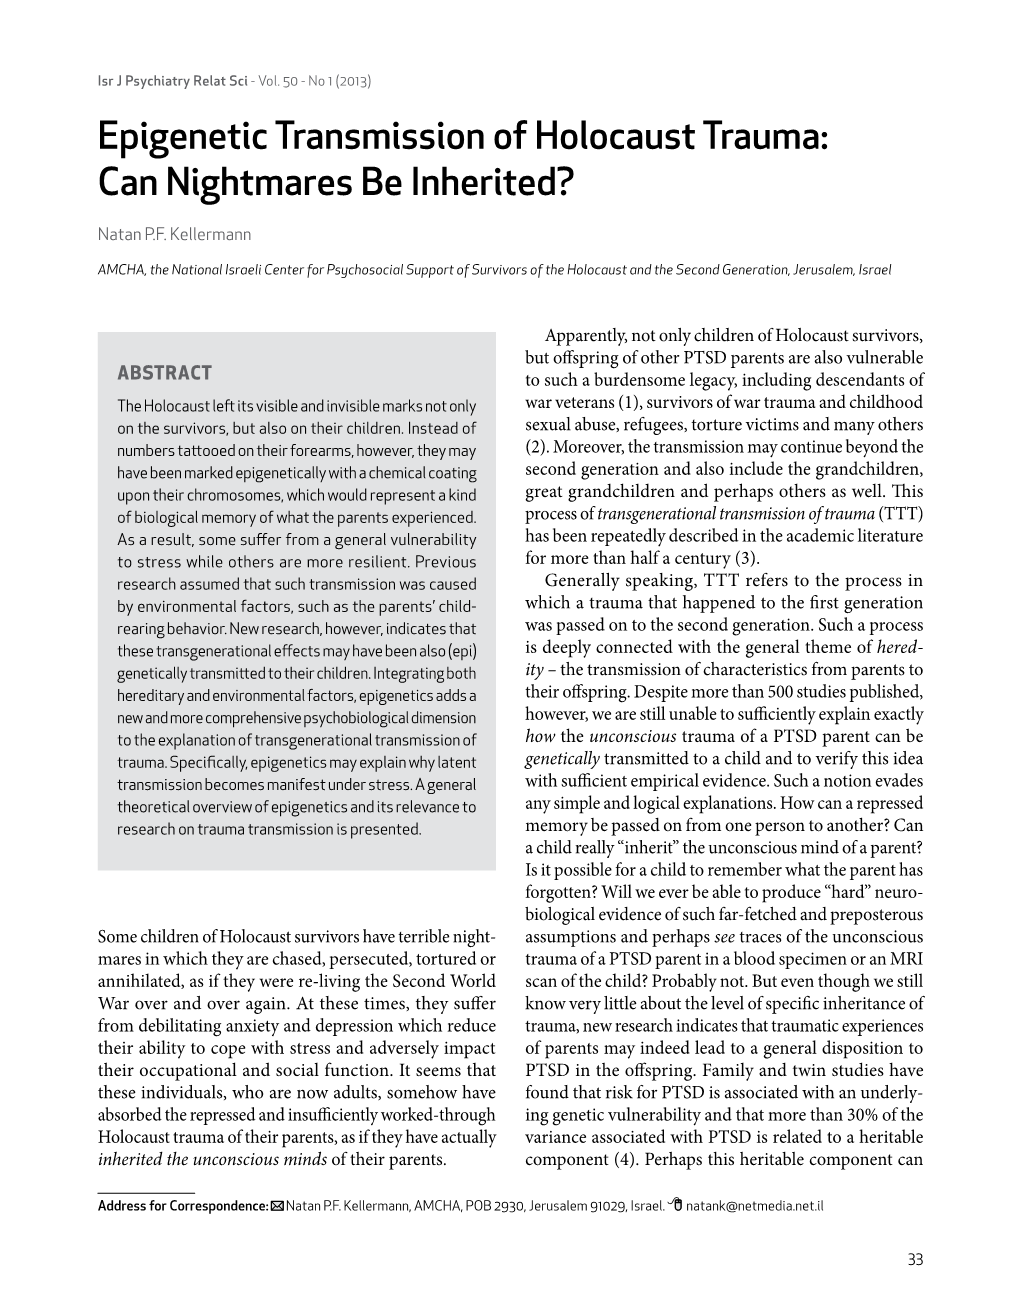 Epigenetic Transmission of Holocaust Trauma: Can Nightmares Be Inherited?